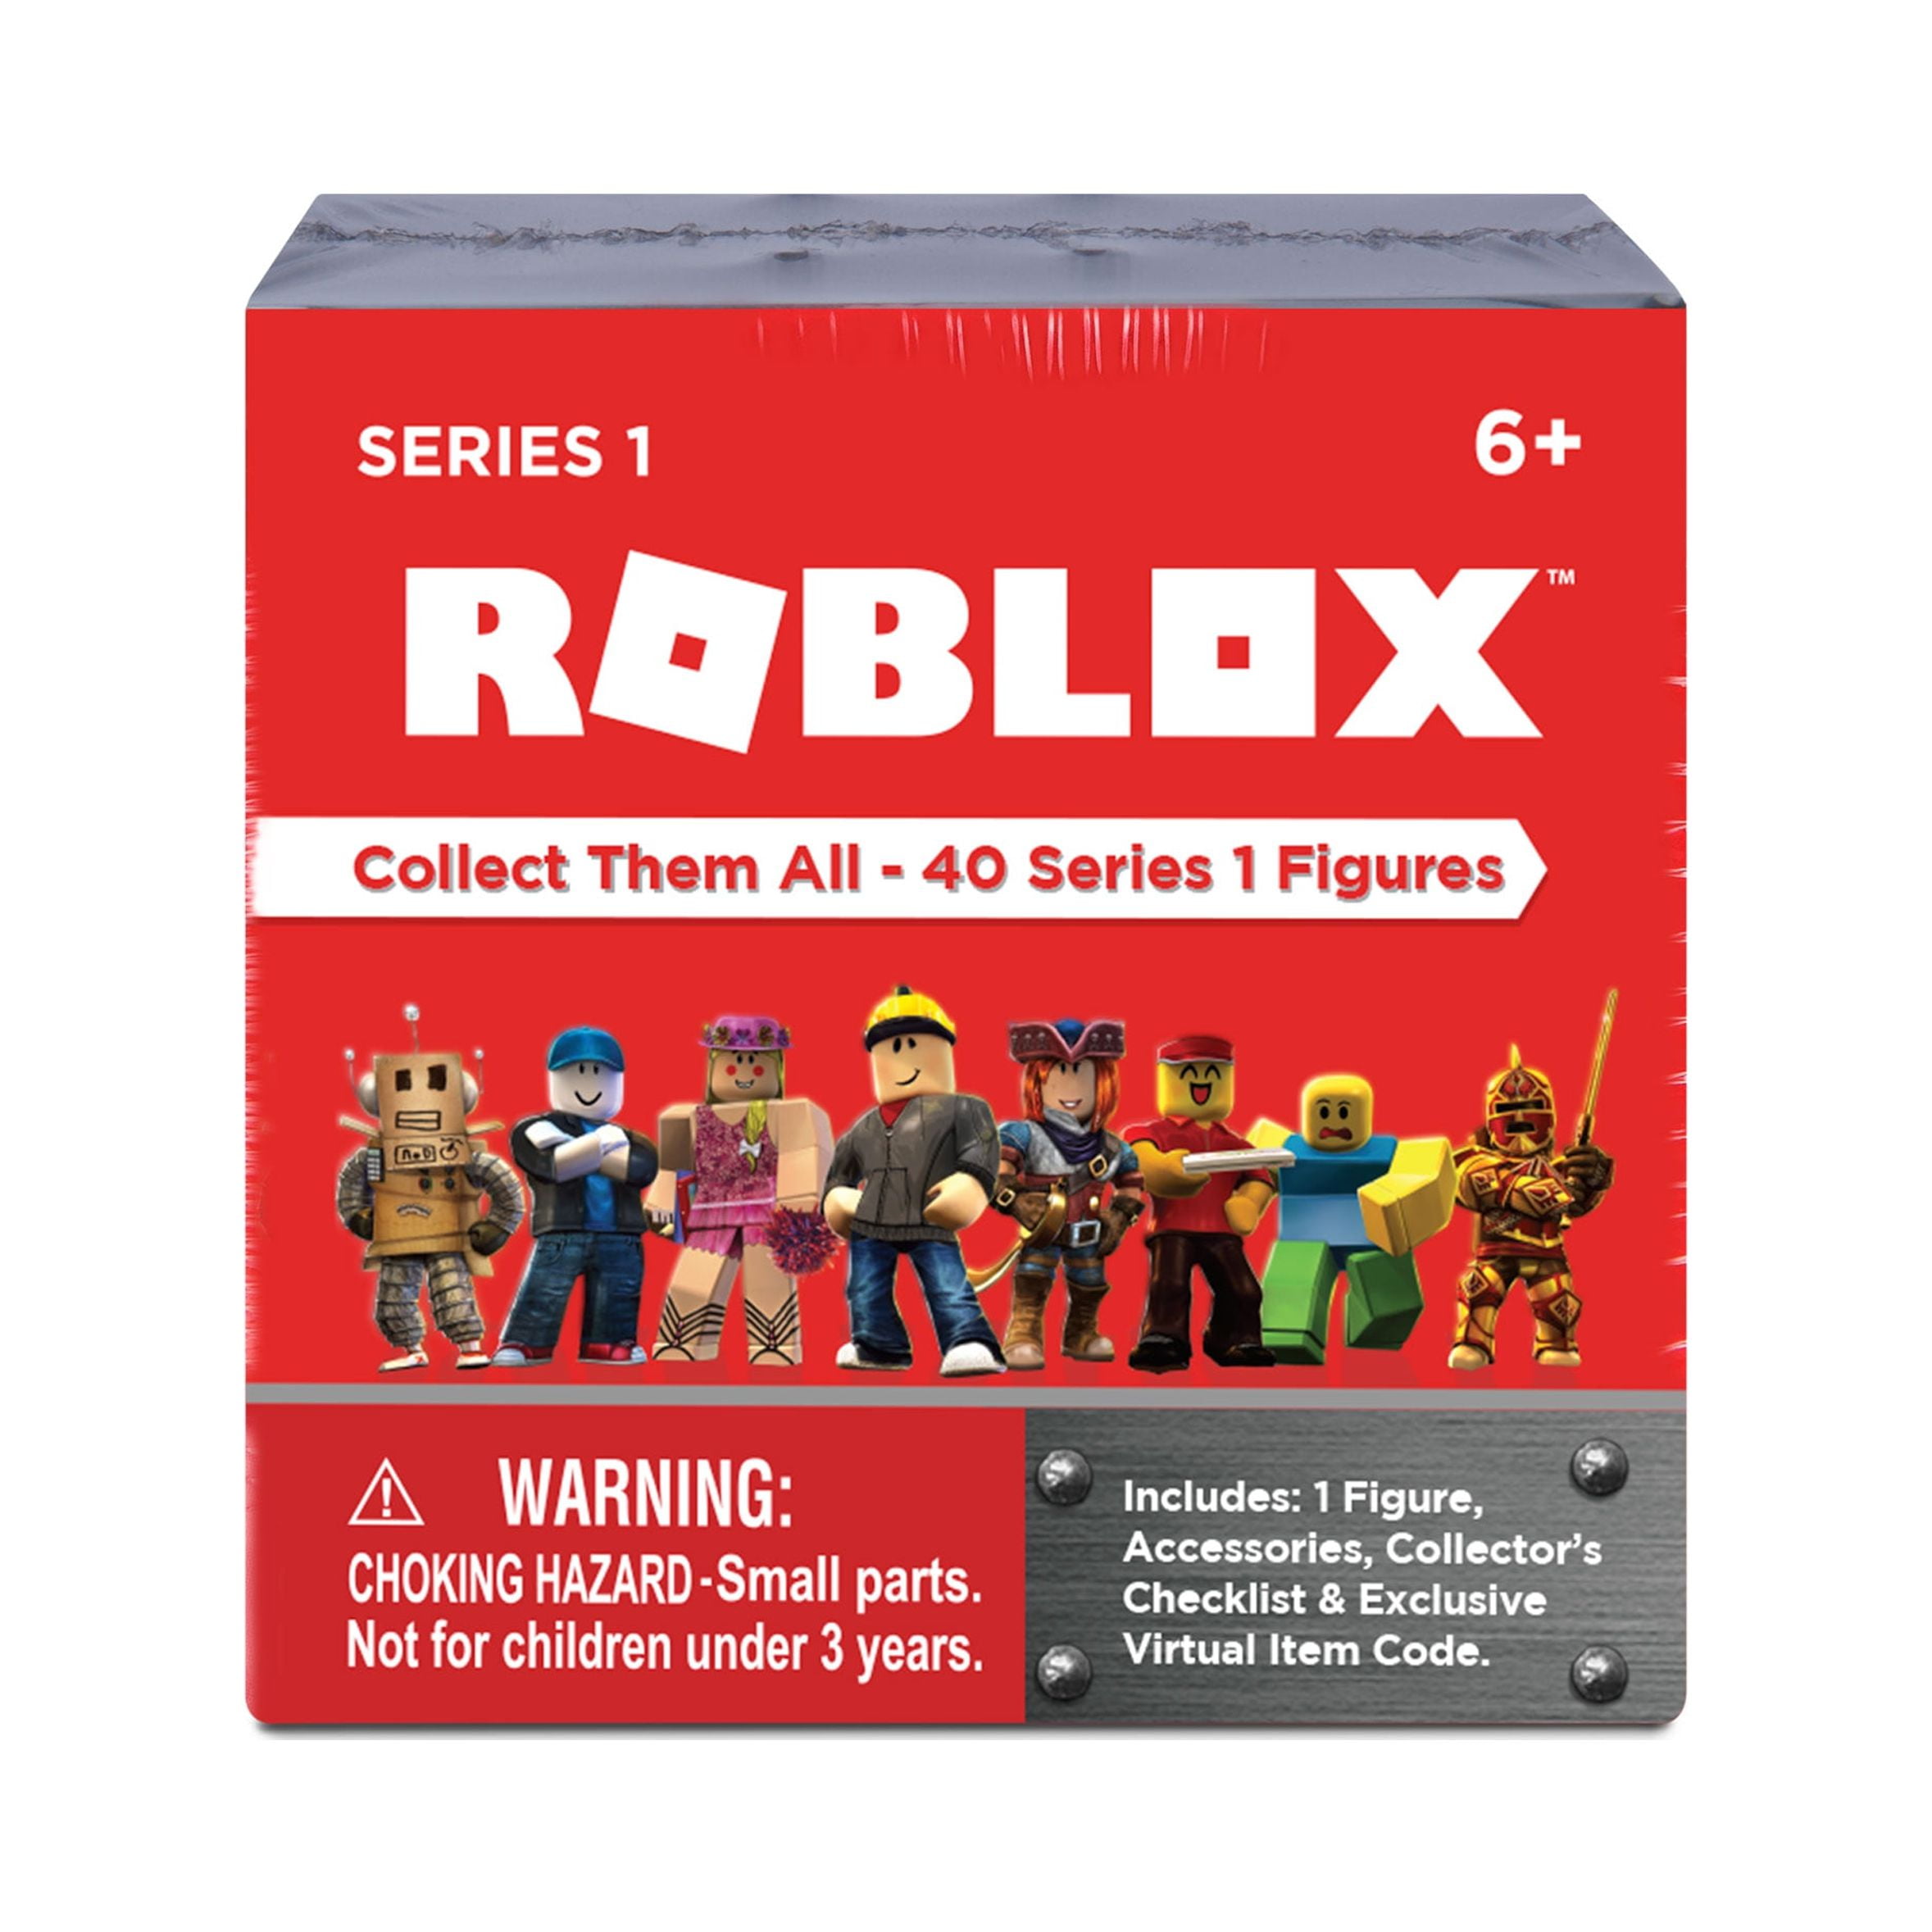 Roblox is Featured By Box for roblox Sorted by Most Views